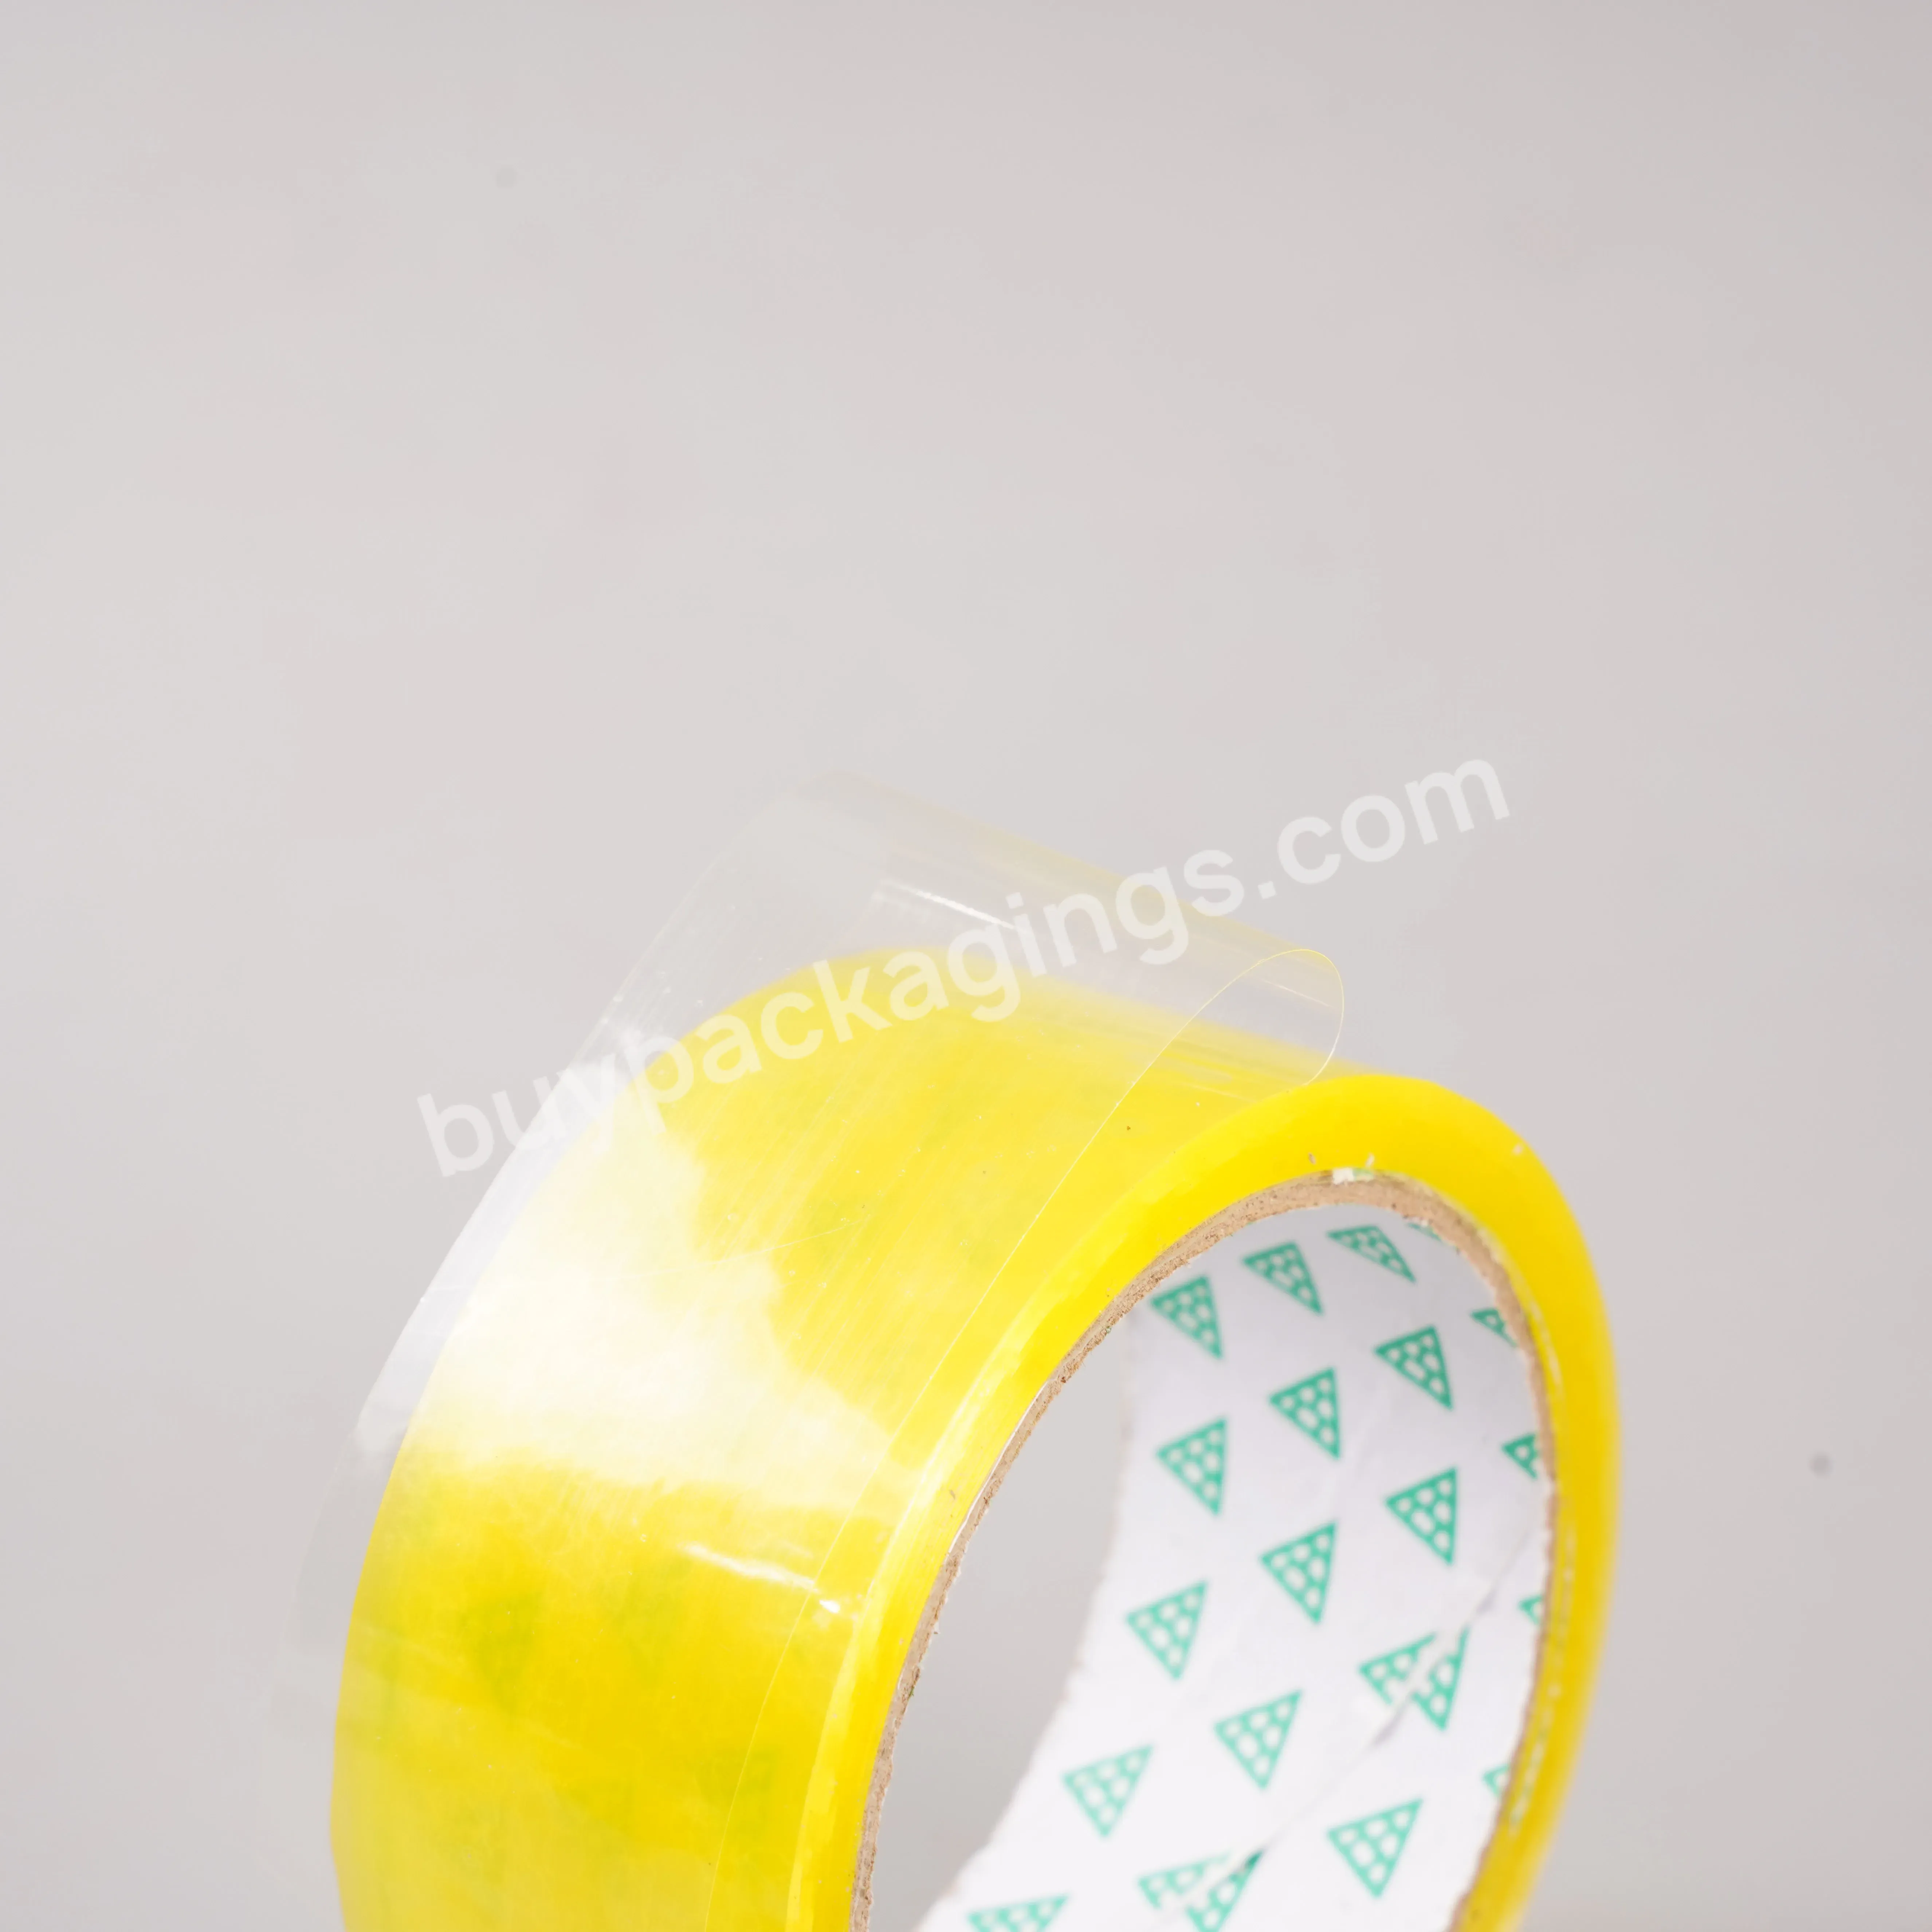 Single Sided Packaging And Sealing Transparent Tape Express Sealing Tape - Buy Packaging Adhesive Tape,Bopp Single Sided Packaging Tape,Buy Adhesive Tape.